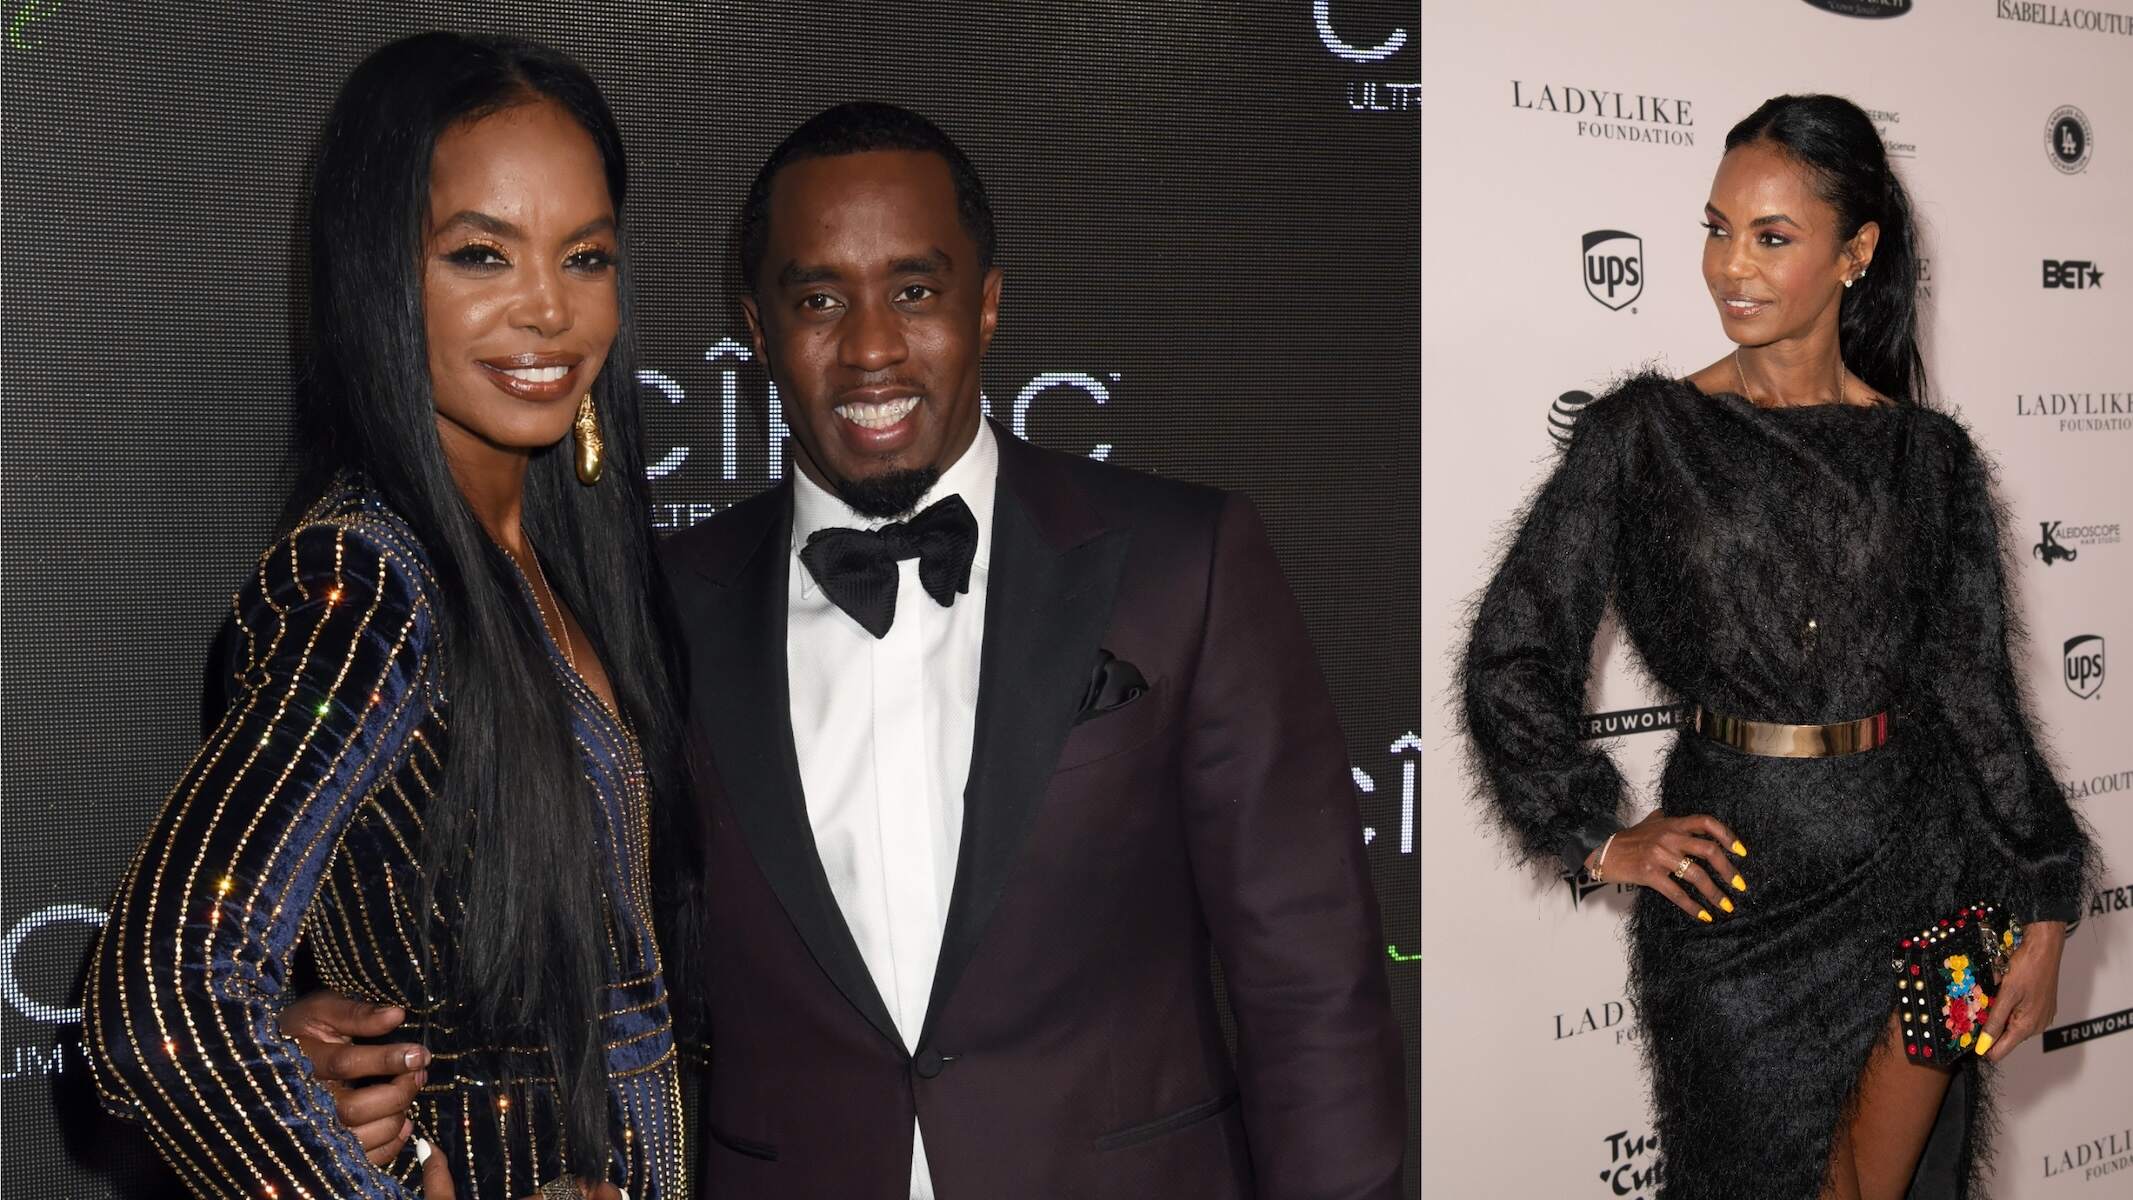 A photo of Kim Porter and Diddy in formalwear alongside a photo of Kim in a black gown